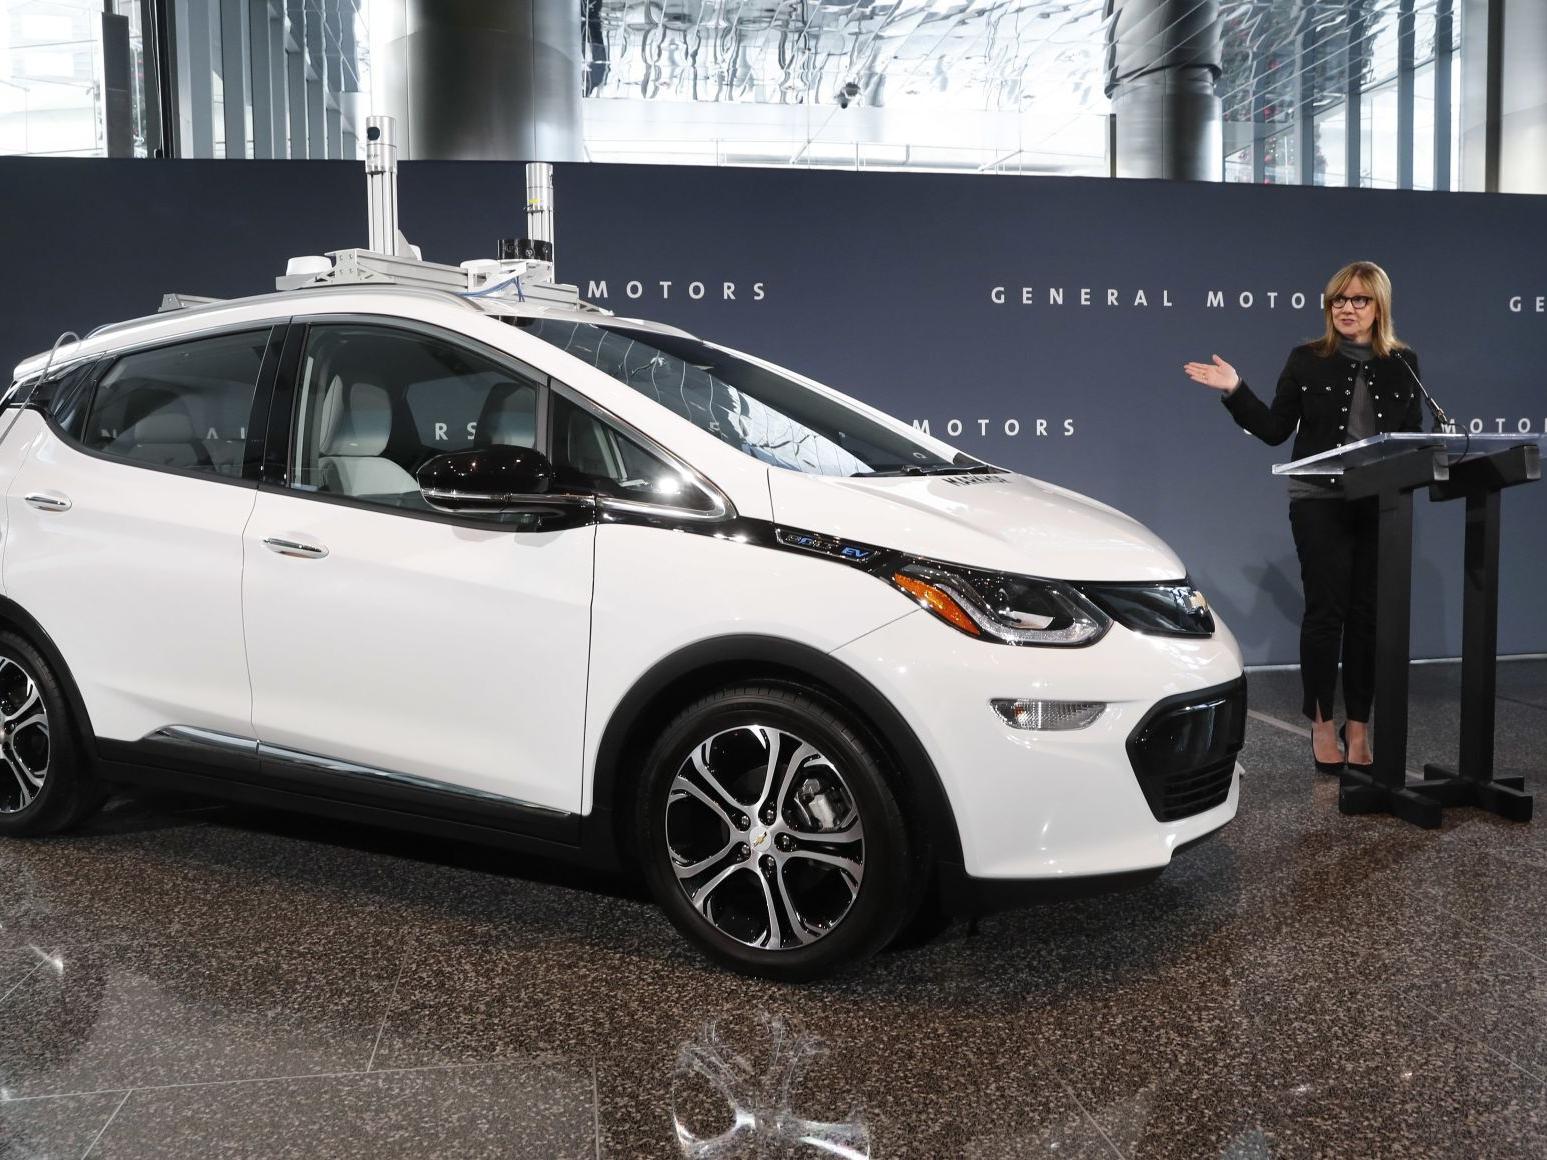 GM to manufacture own "family" of EV drive systems, motors | Local Business  | stltoday.com